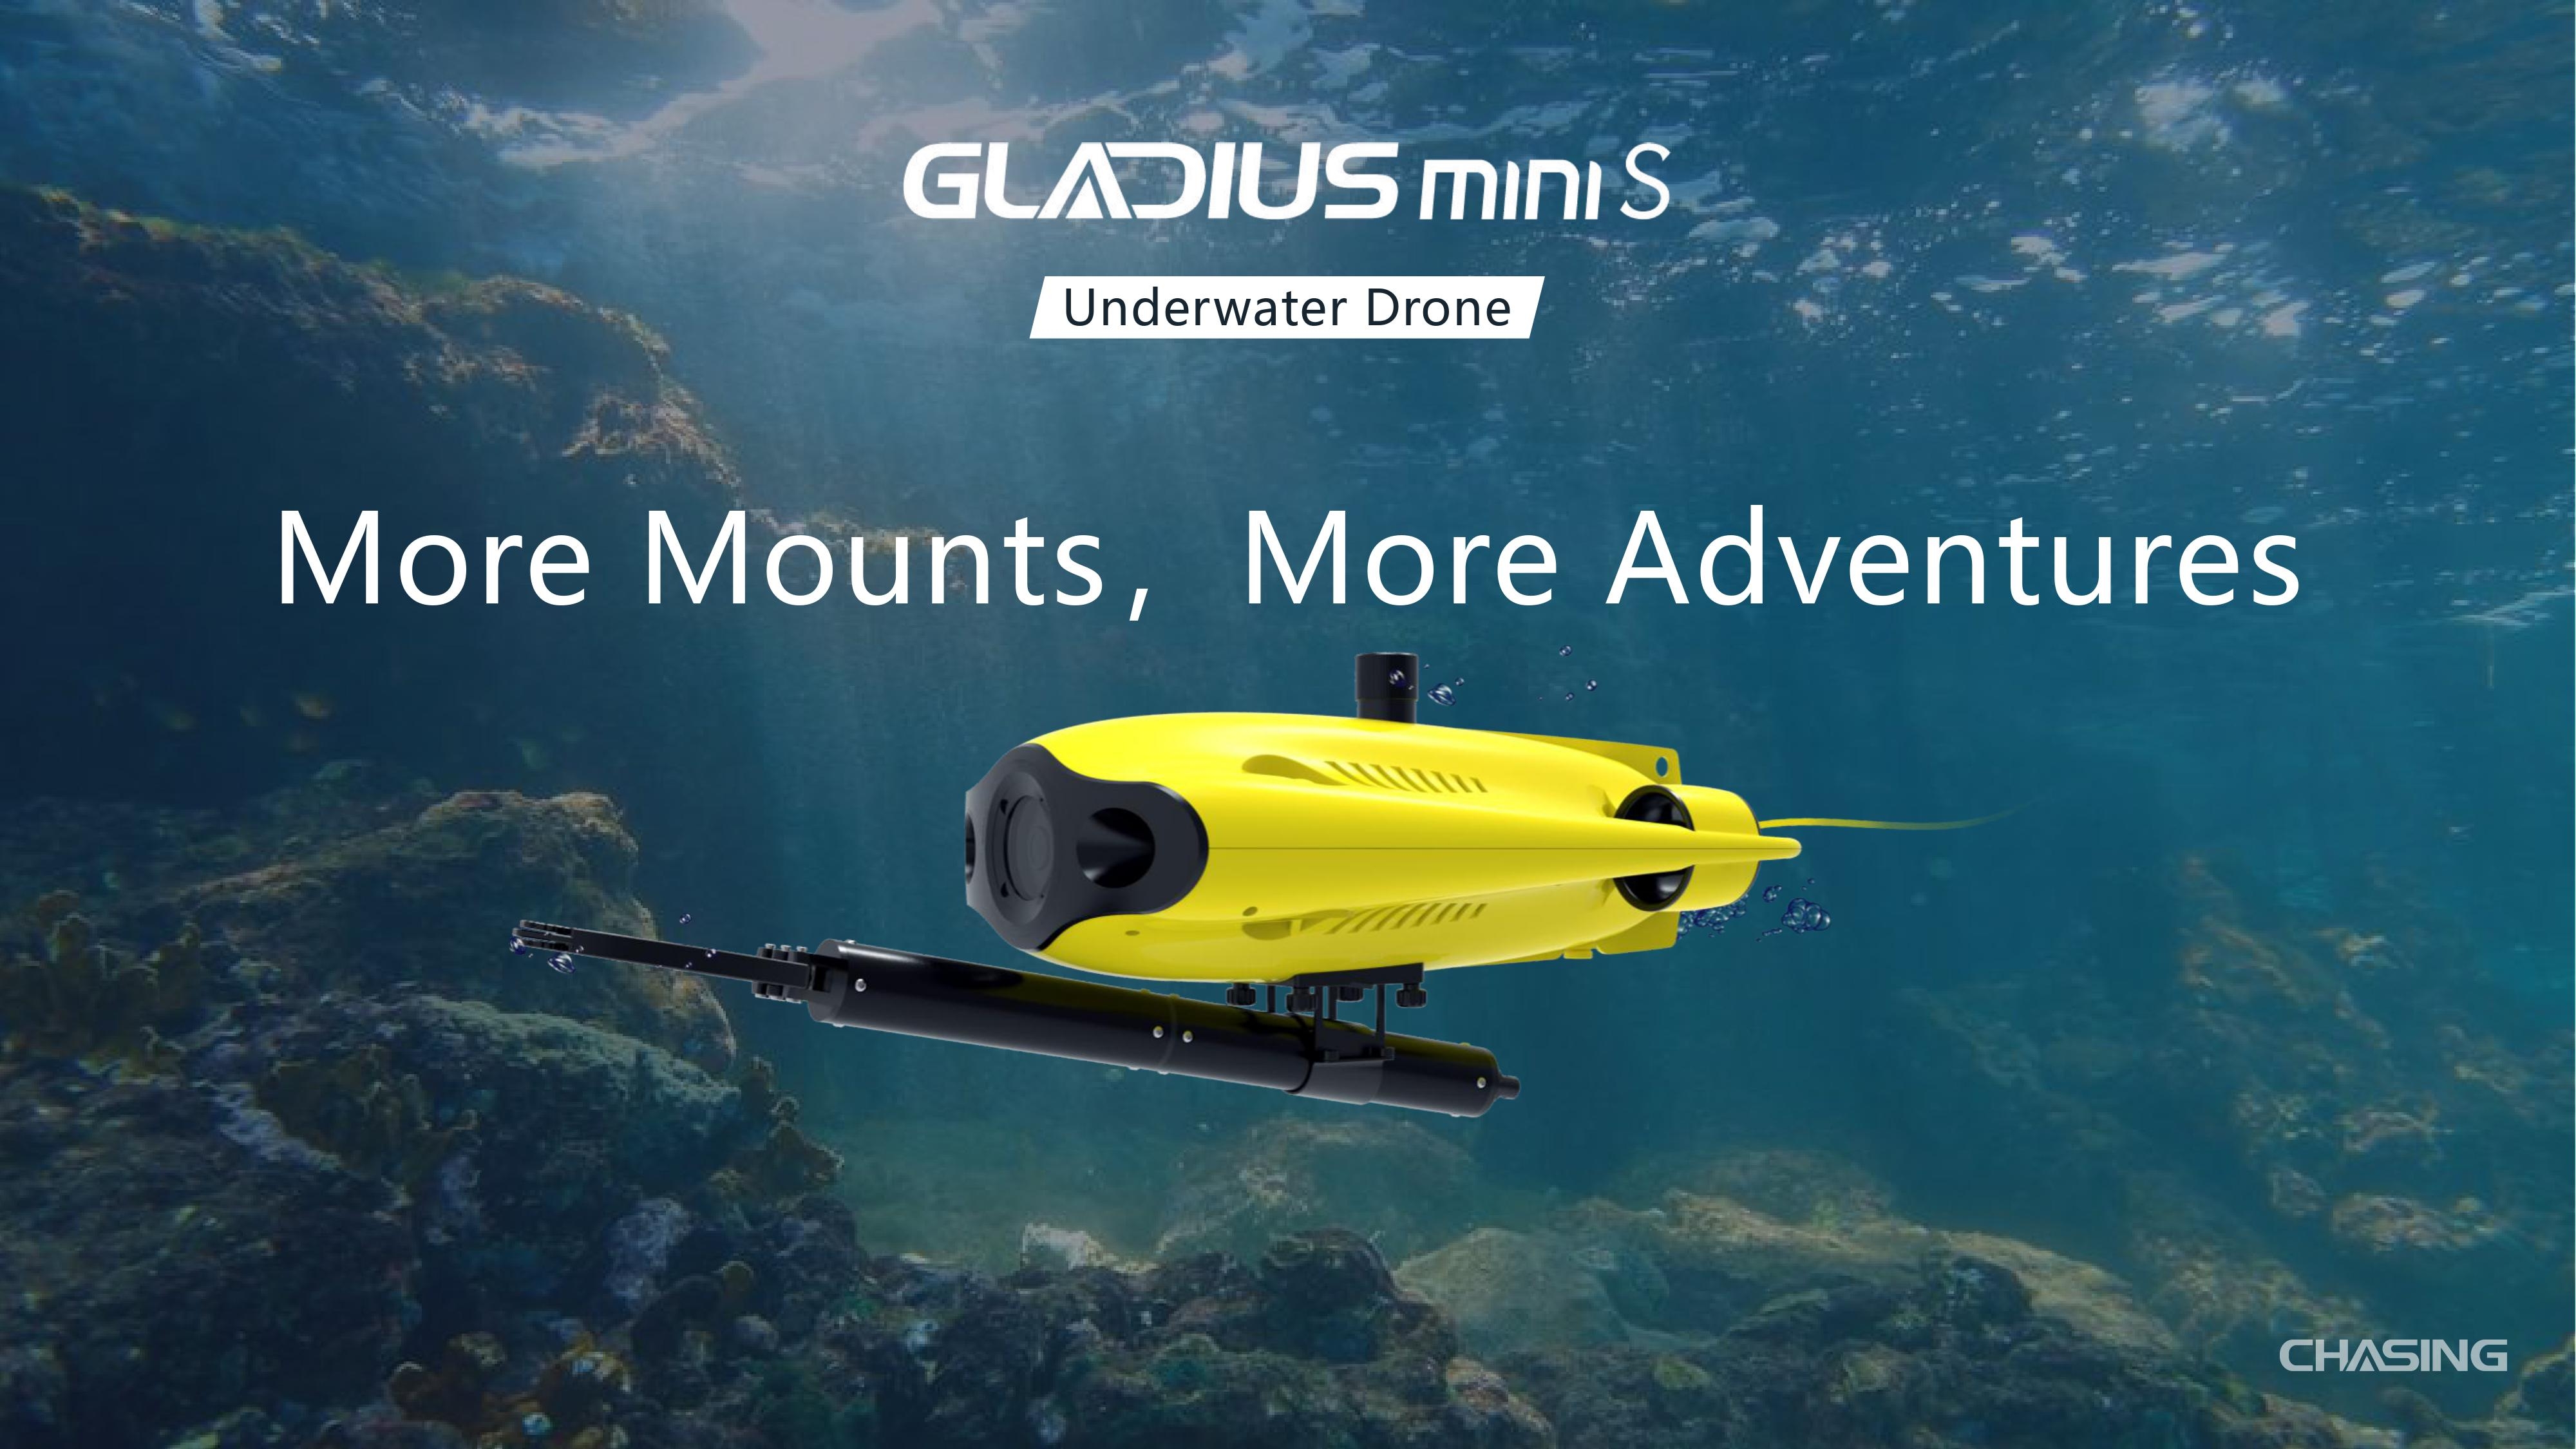 Chasing Gladius Mini S Underwater Drone with 4K UHD EIS F1.8 Aperture Camera 100m Depth Rating 4h Runtime ROV for Photography Scientific Exploration and Safety Inspection